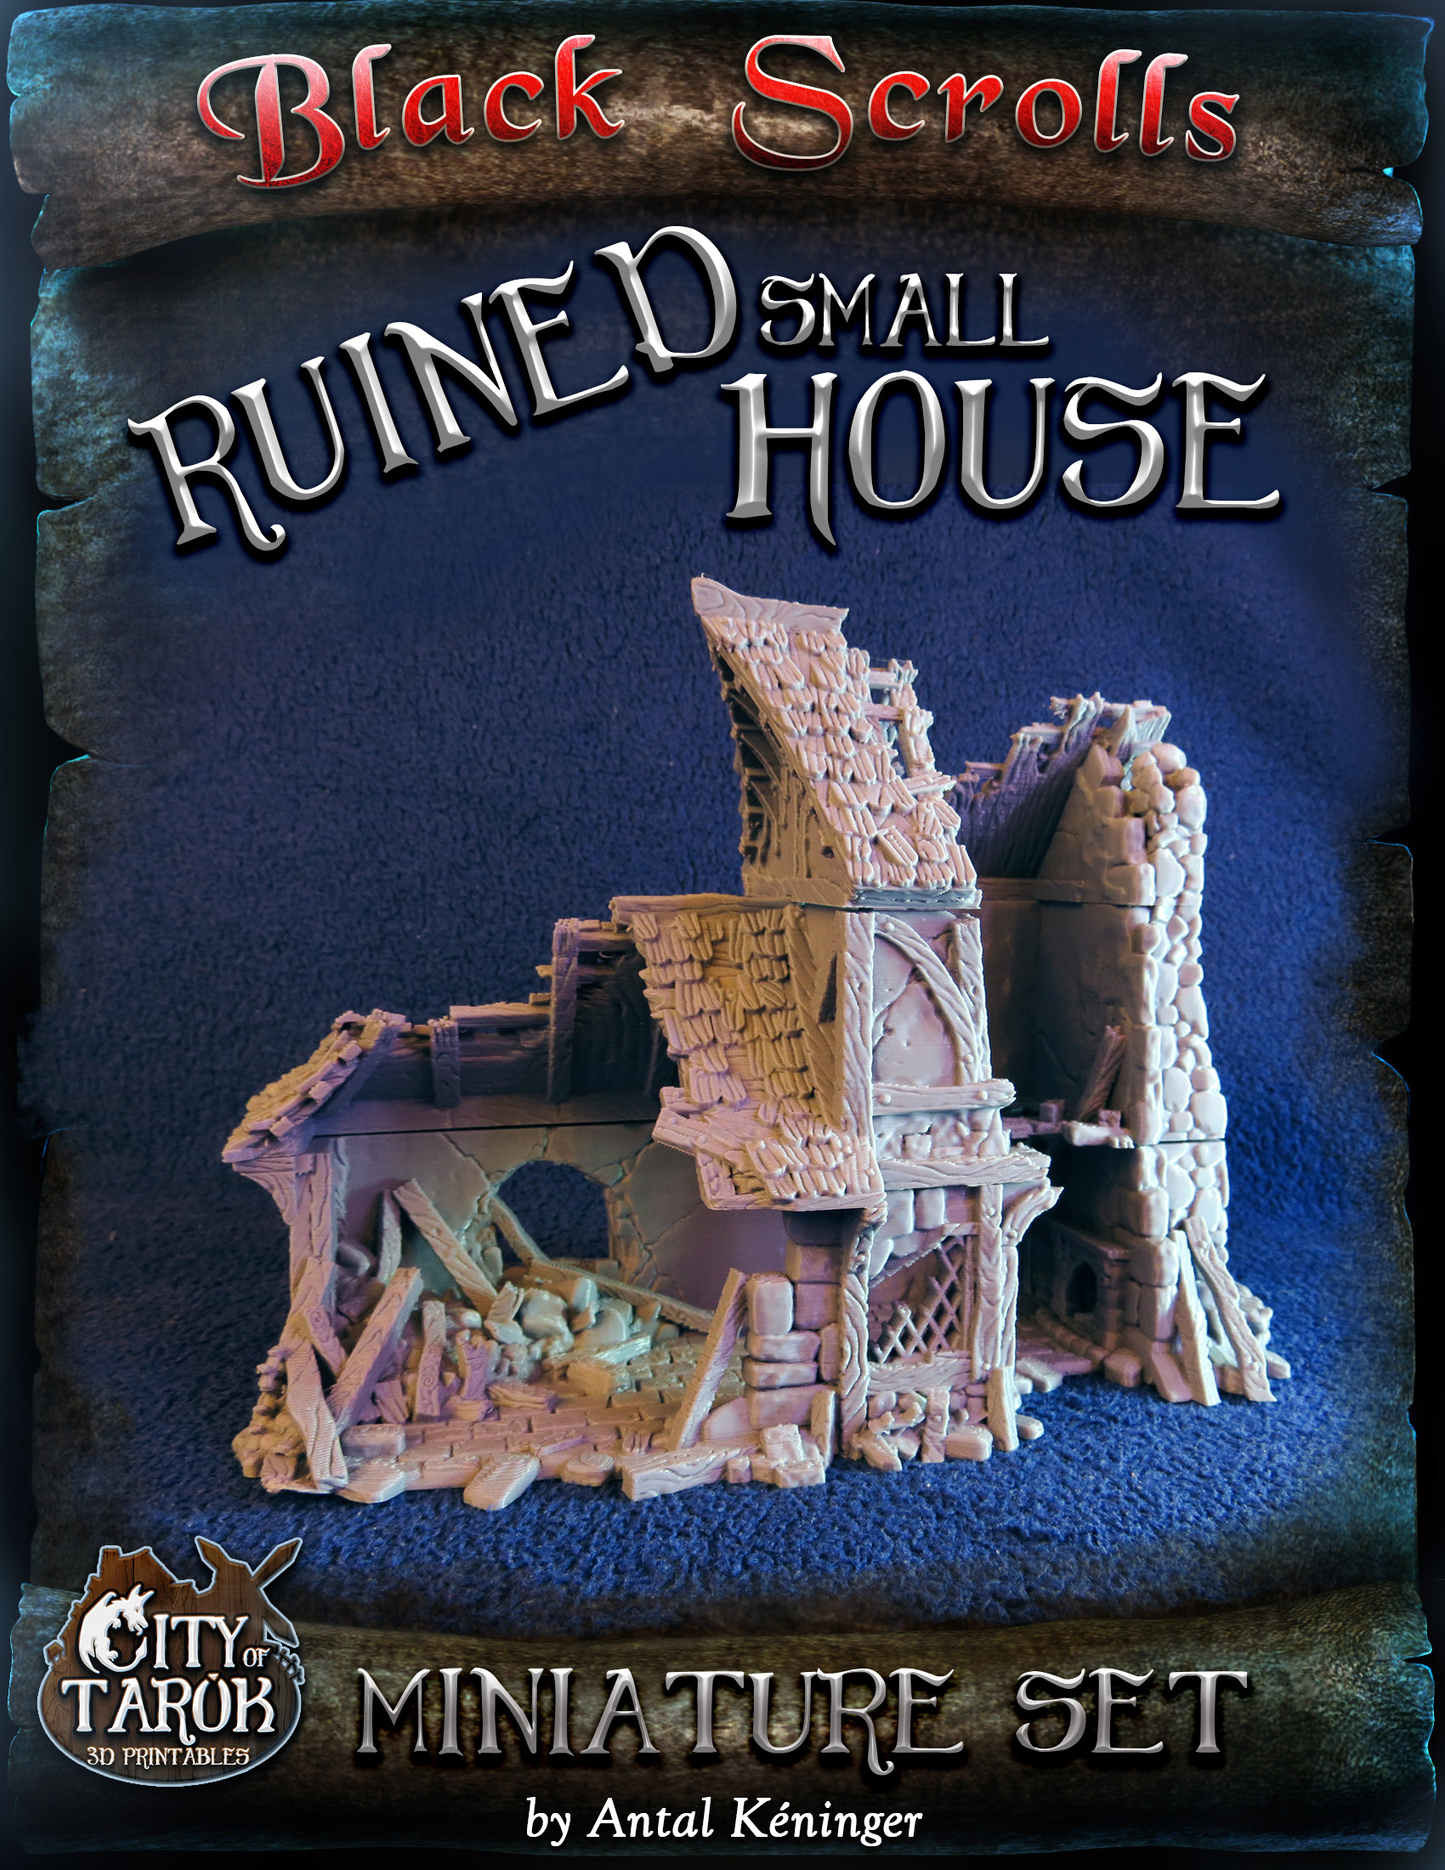 Small House Destroy City of Tarok for RPGs, Board Games, Painters and Collectors